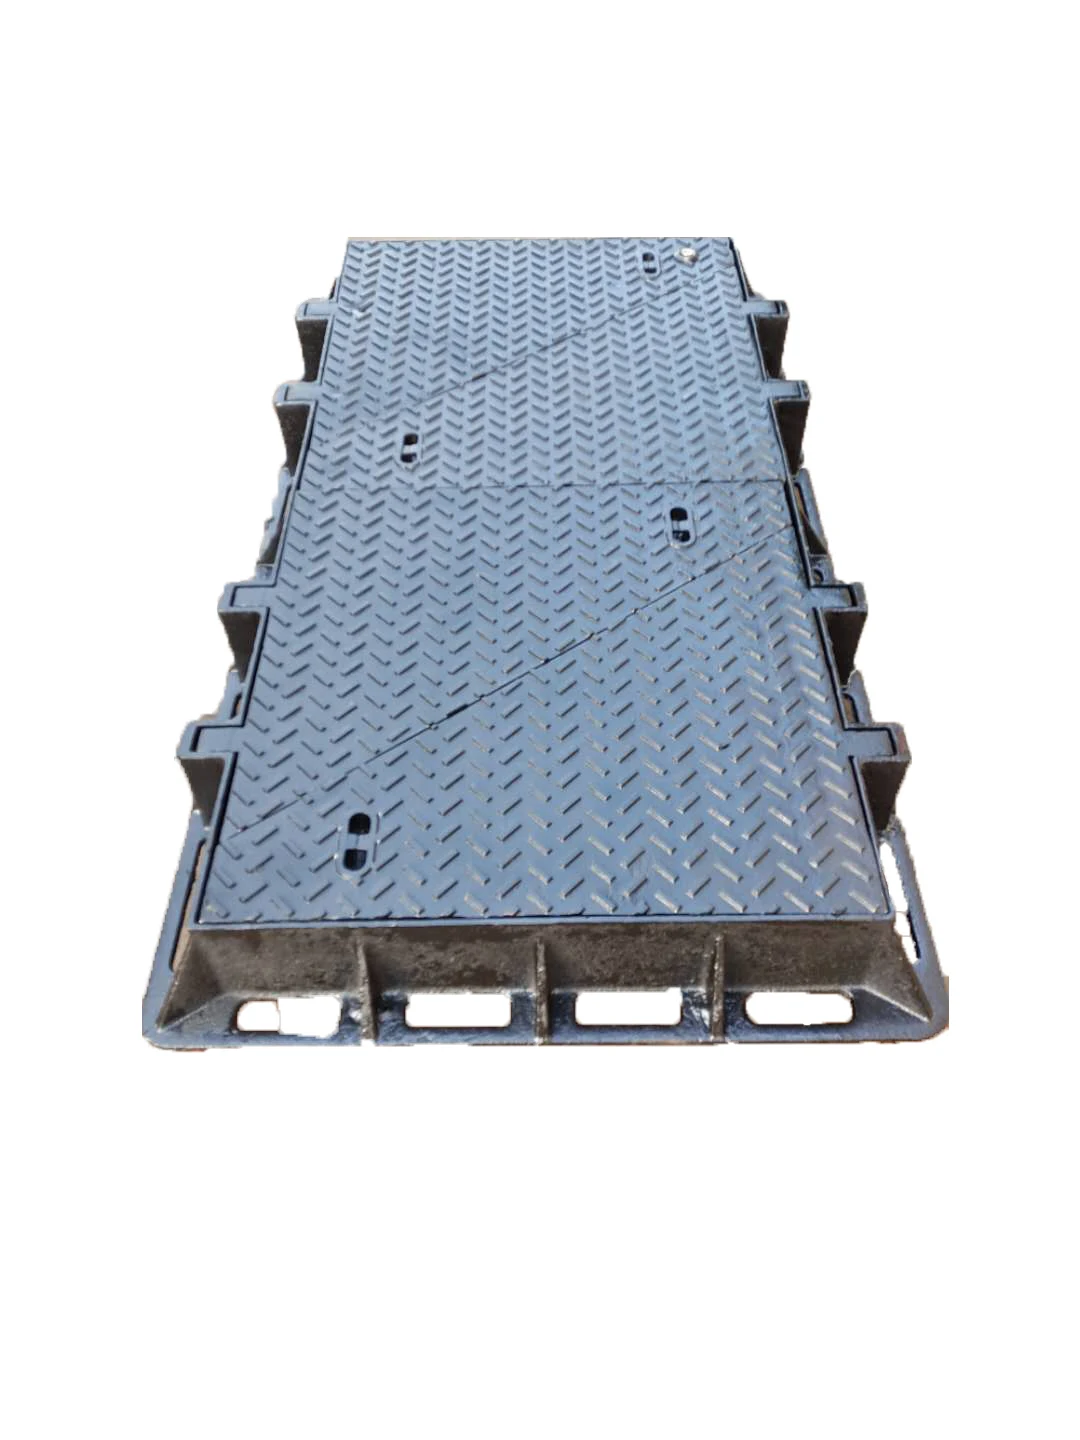 JRC 12 Etisalat  CW3ST Carriageway Covers and Frames Telecom manhole cover